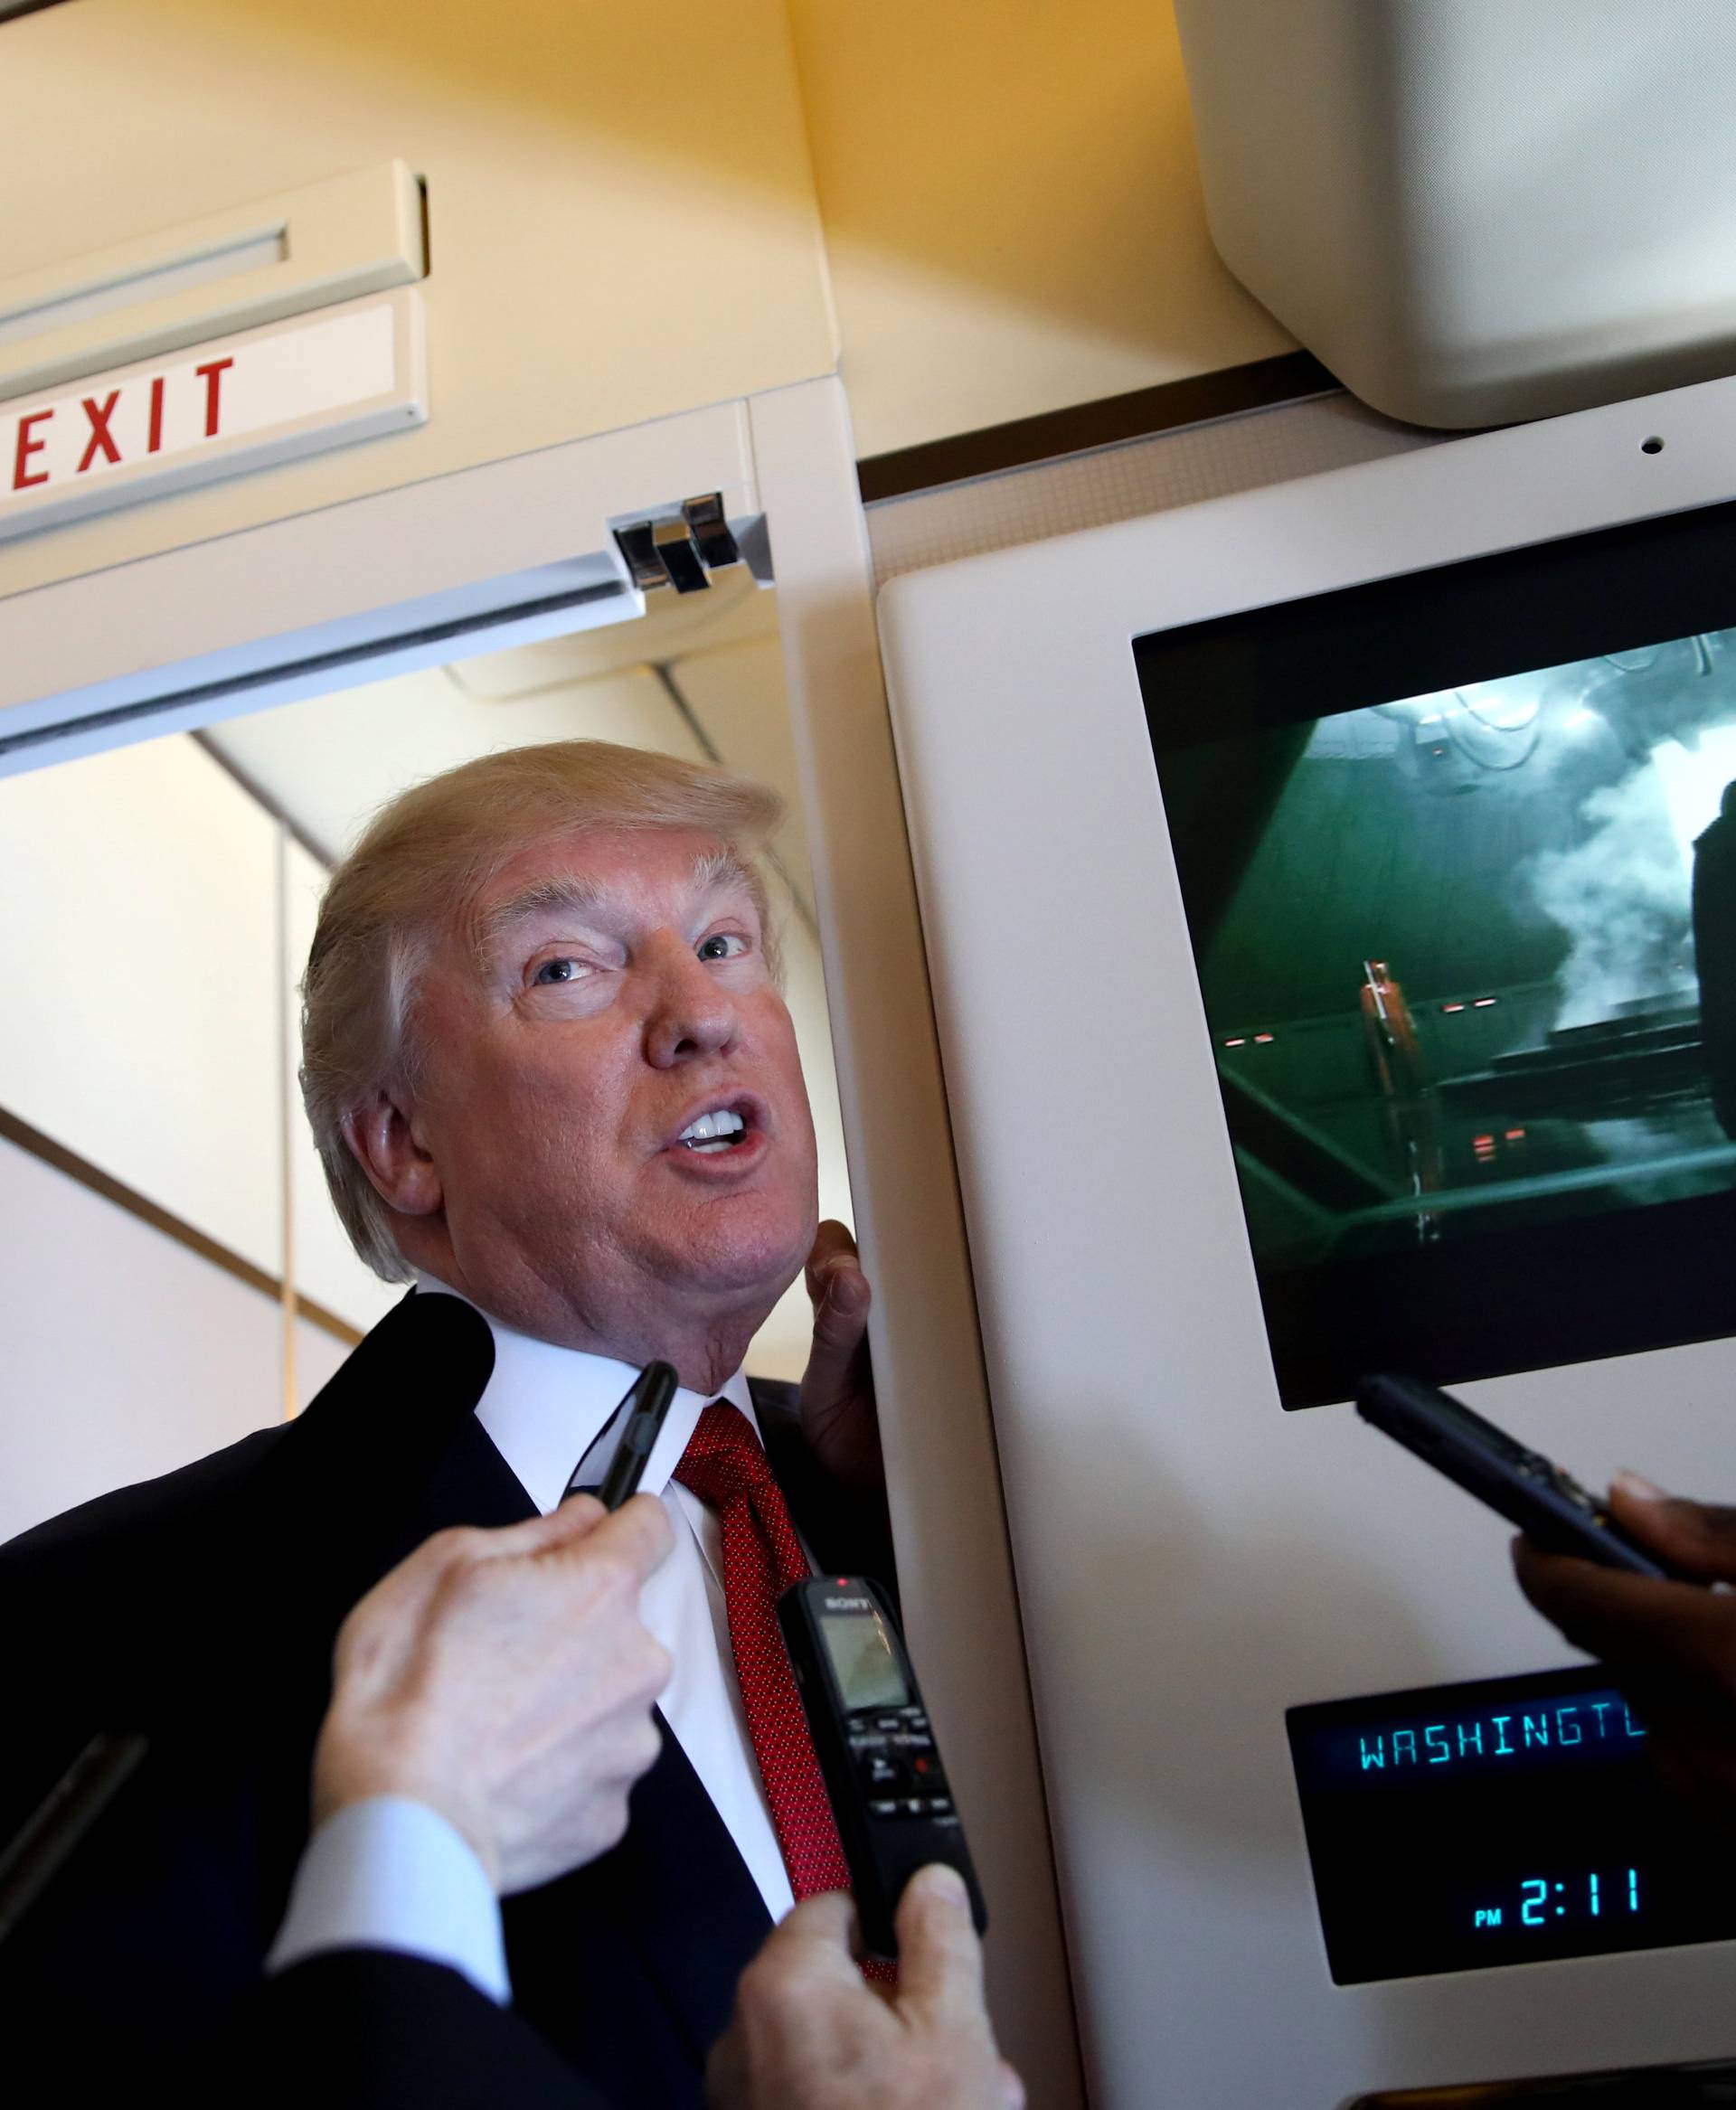 U.S. President Donald Trump talks to journalists, members of the travel pool, on board of Air Force One during his trip to Palm Beach